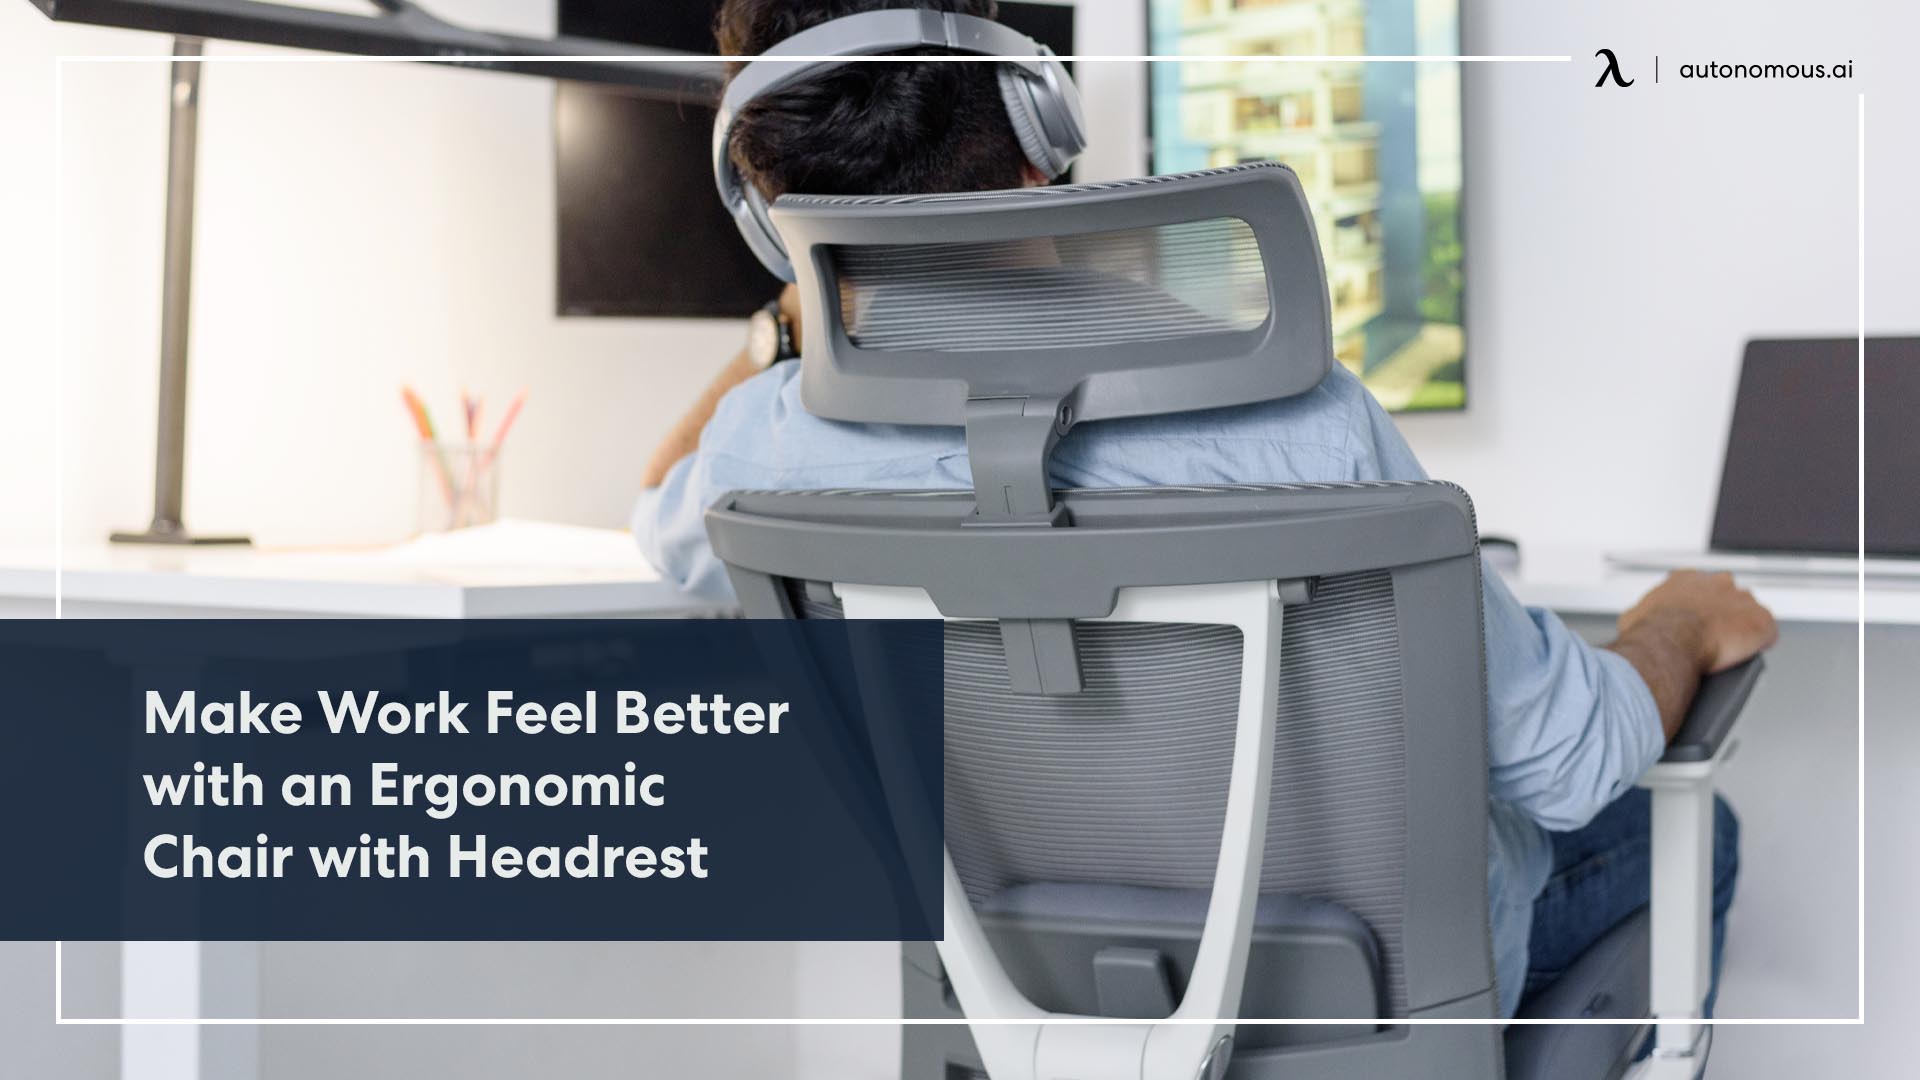 Make Work Feel Better with an Ergonomic Chair with Headrest